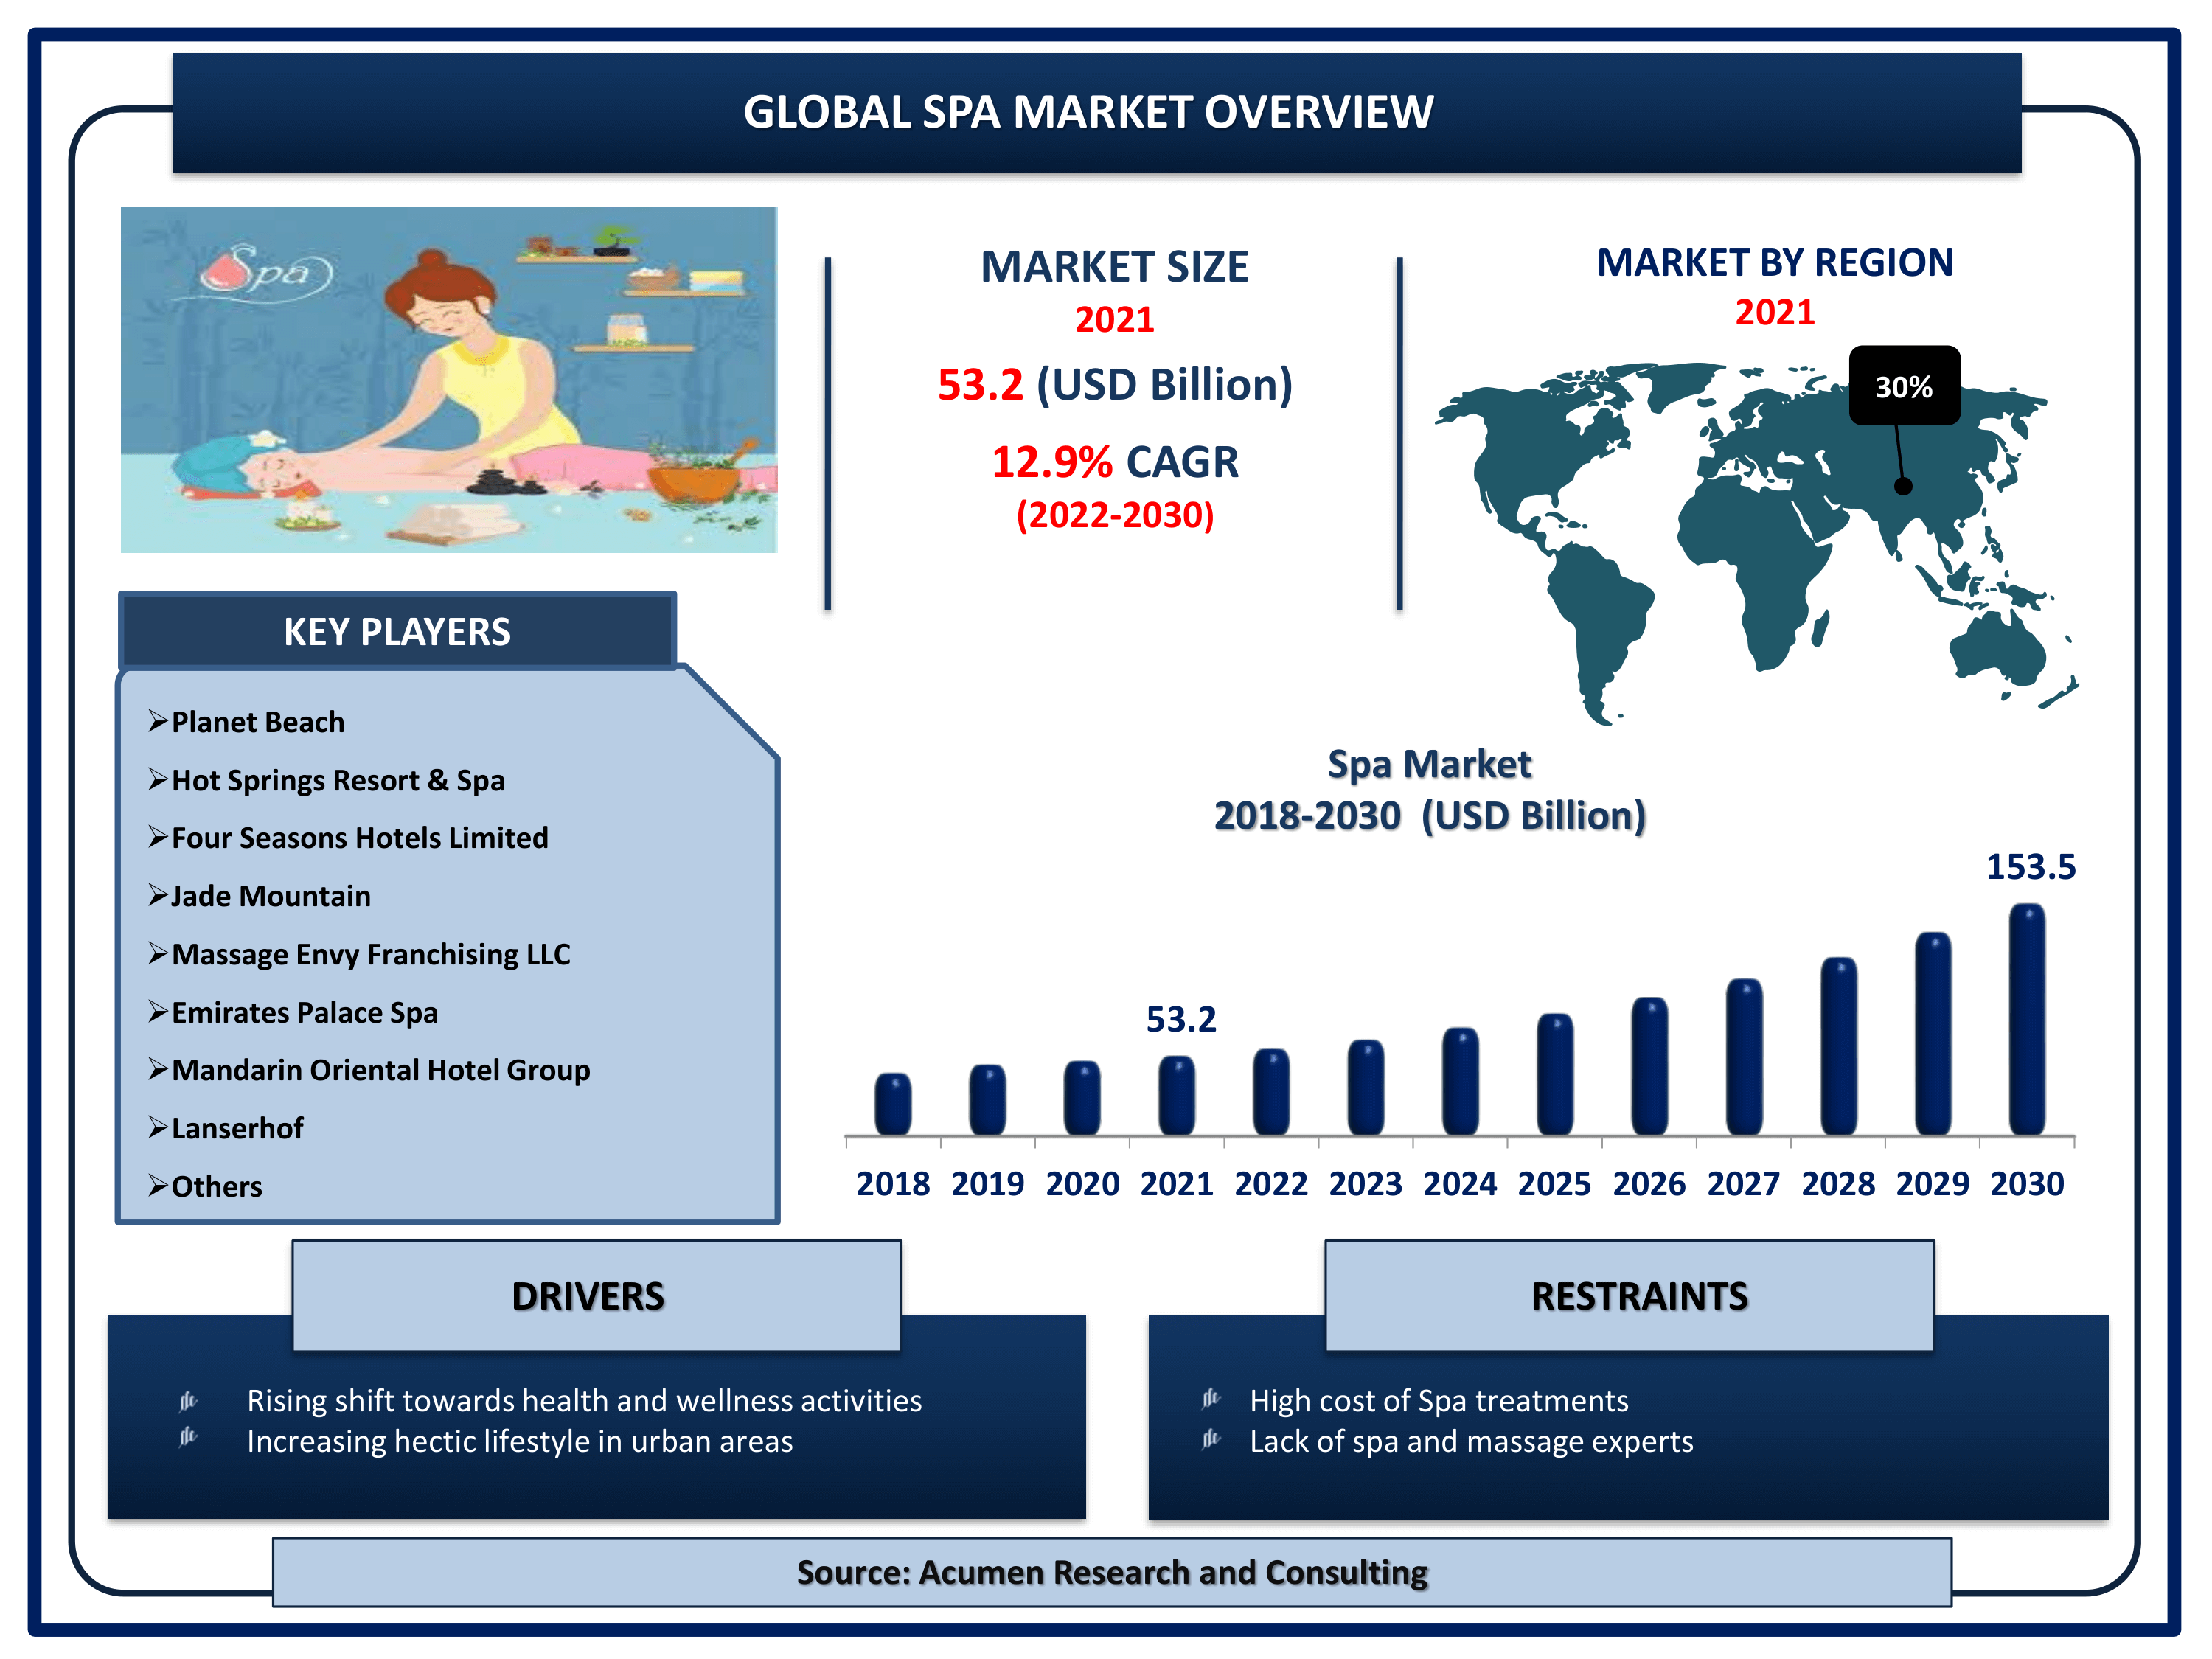 Global spa market revenue is estimated to reach USD 153.5 Billion by 2030 with a CAGR of 12.9% from 2022 to 2030